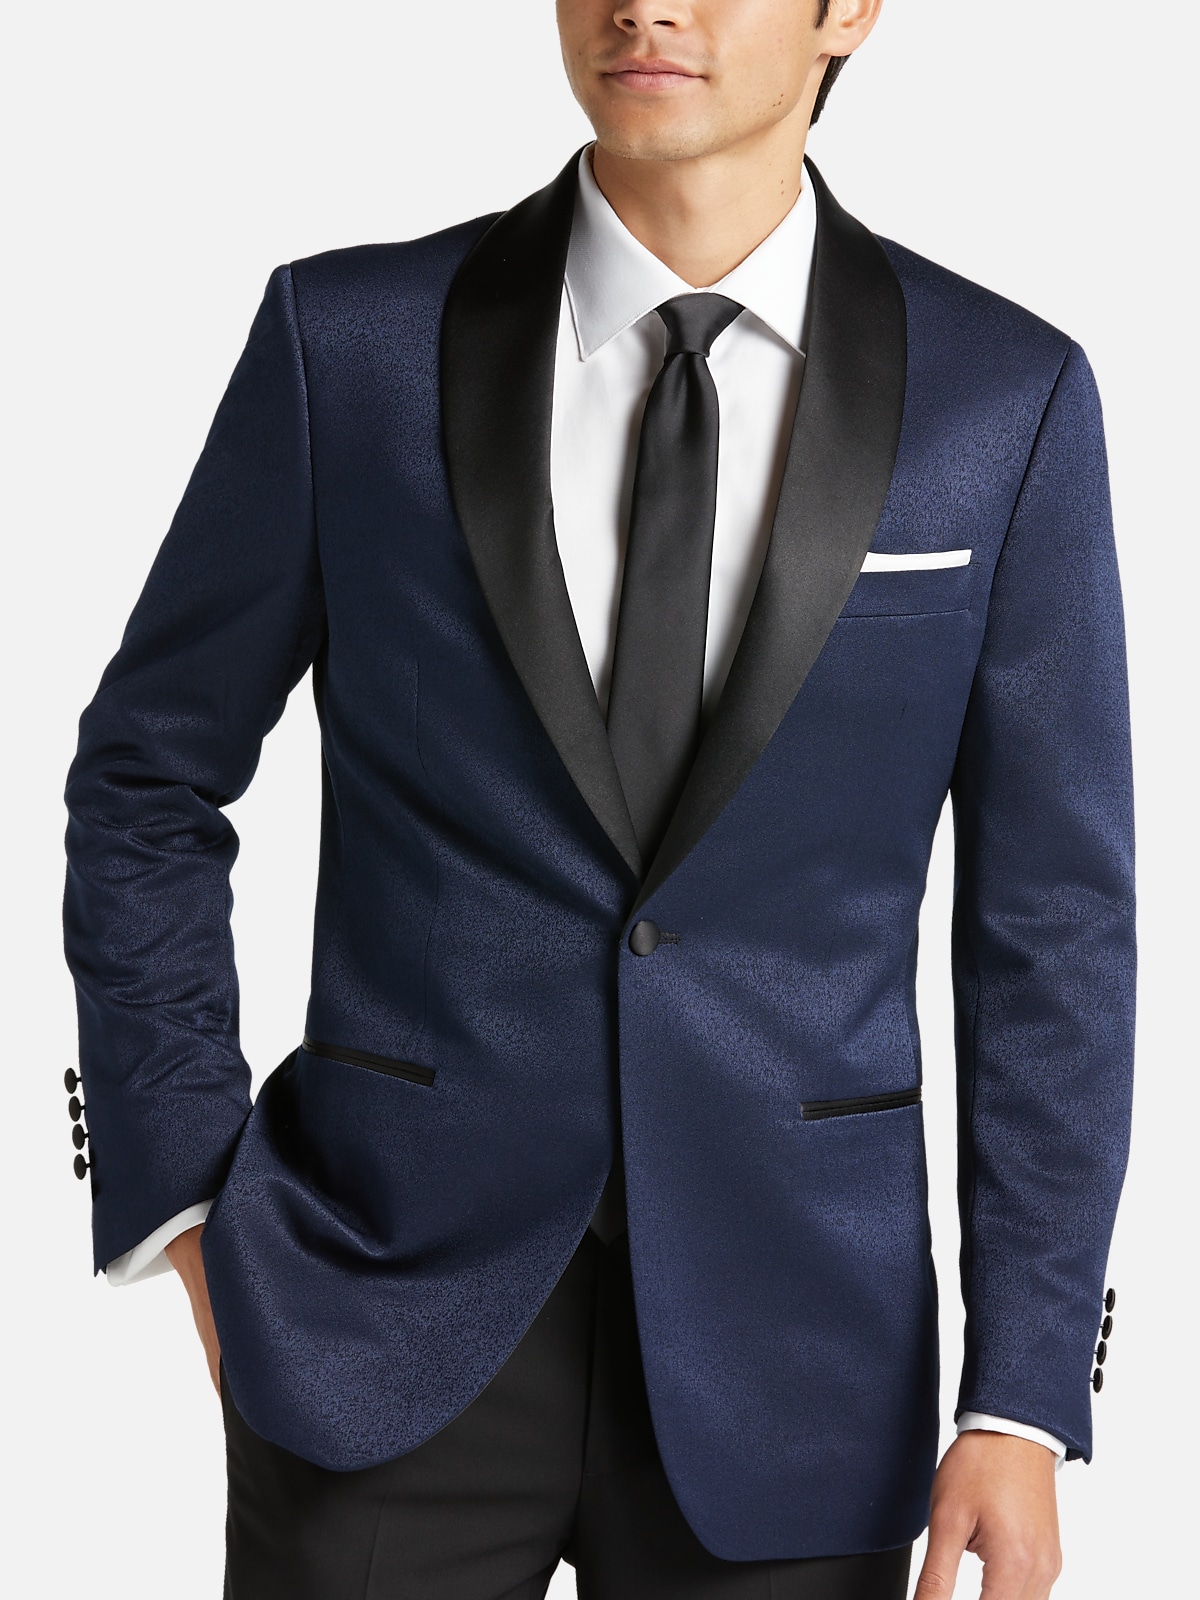 After Hours Slim Fit Shawl Lapel Dinner Jacket | All Sale| Men's Wearhouse